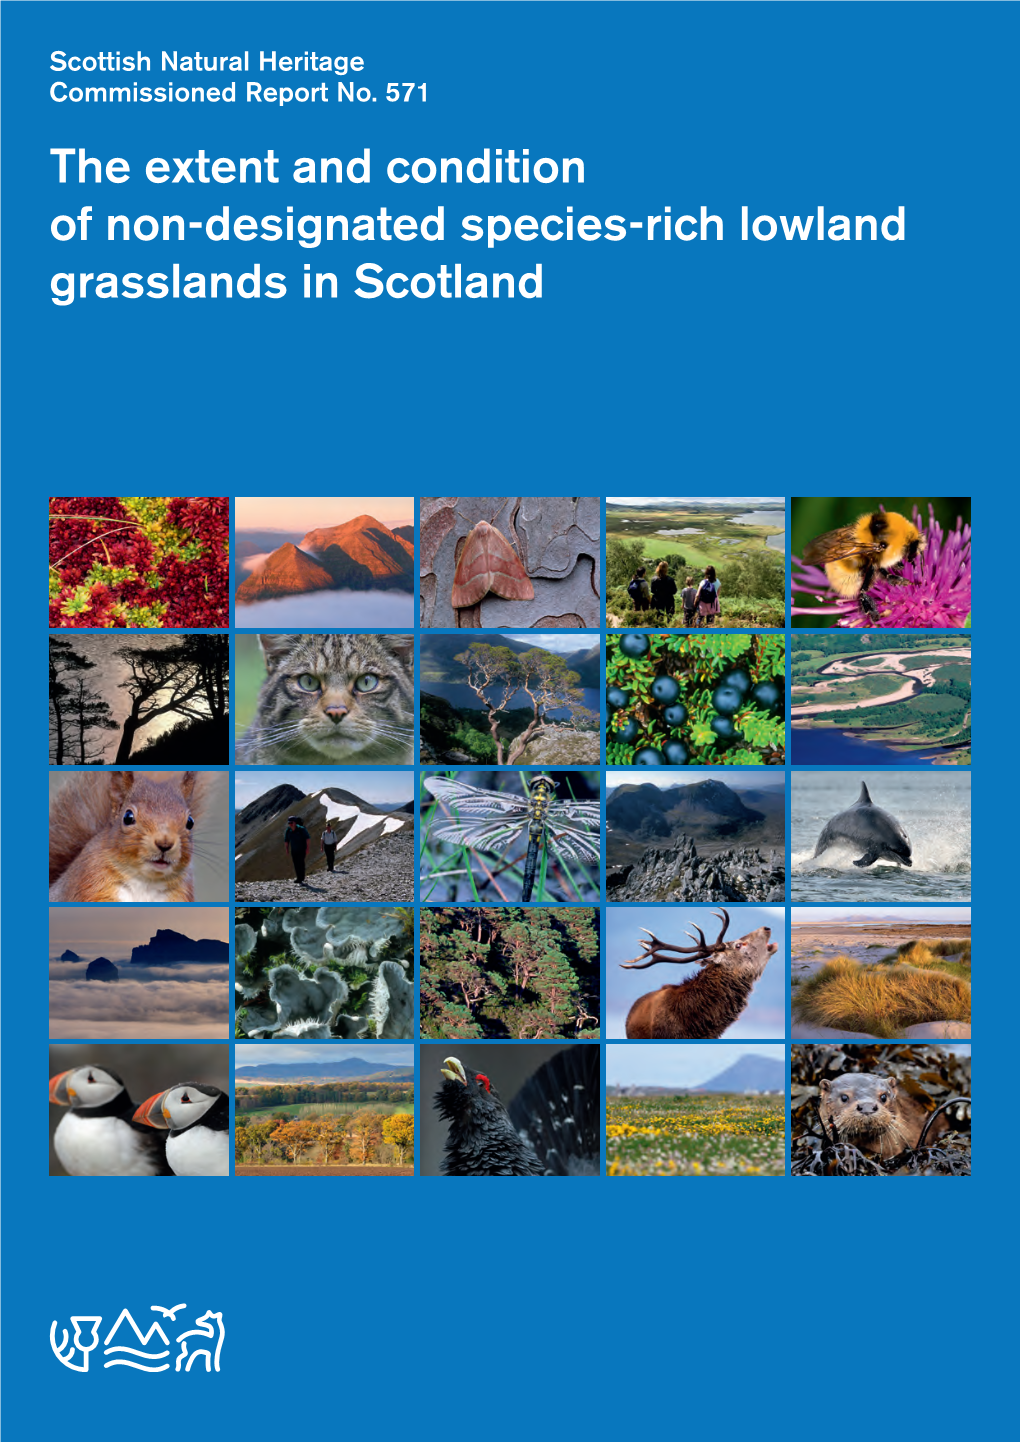 Literature Review of the History of Grassland